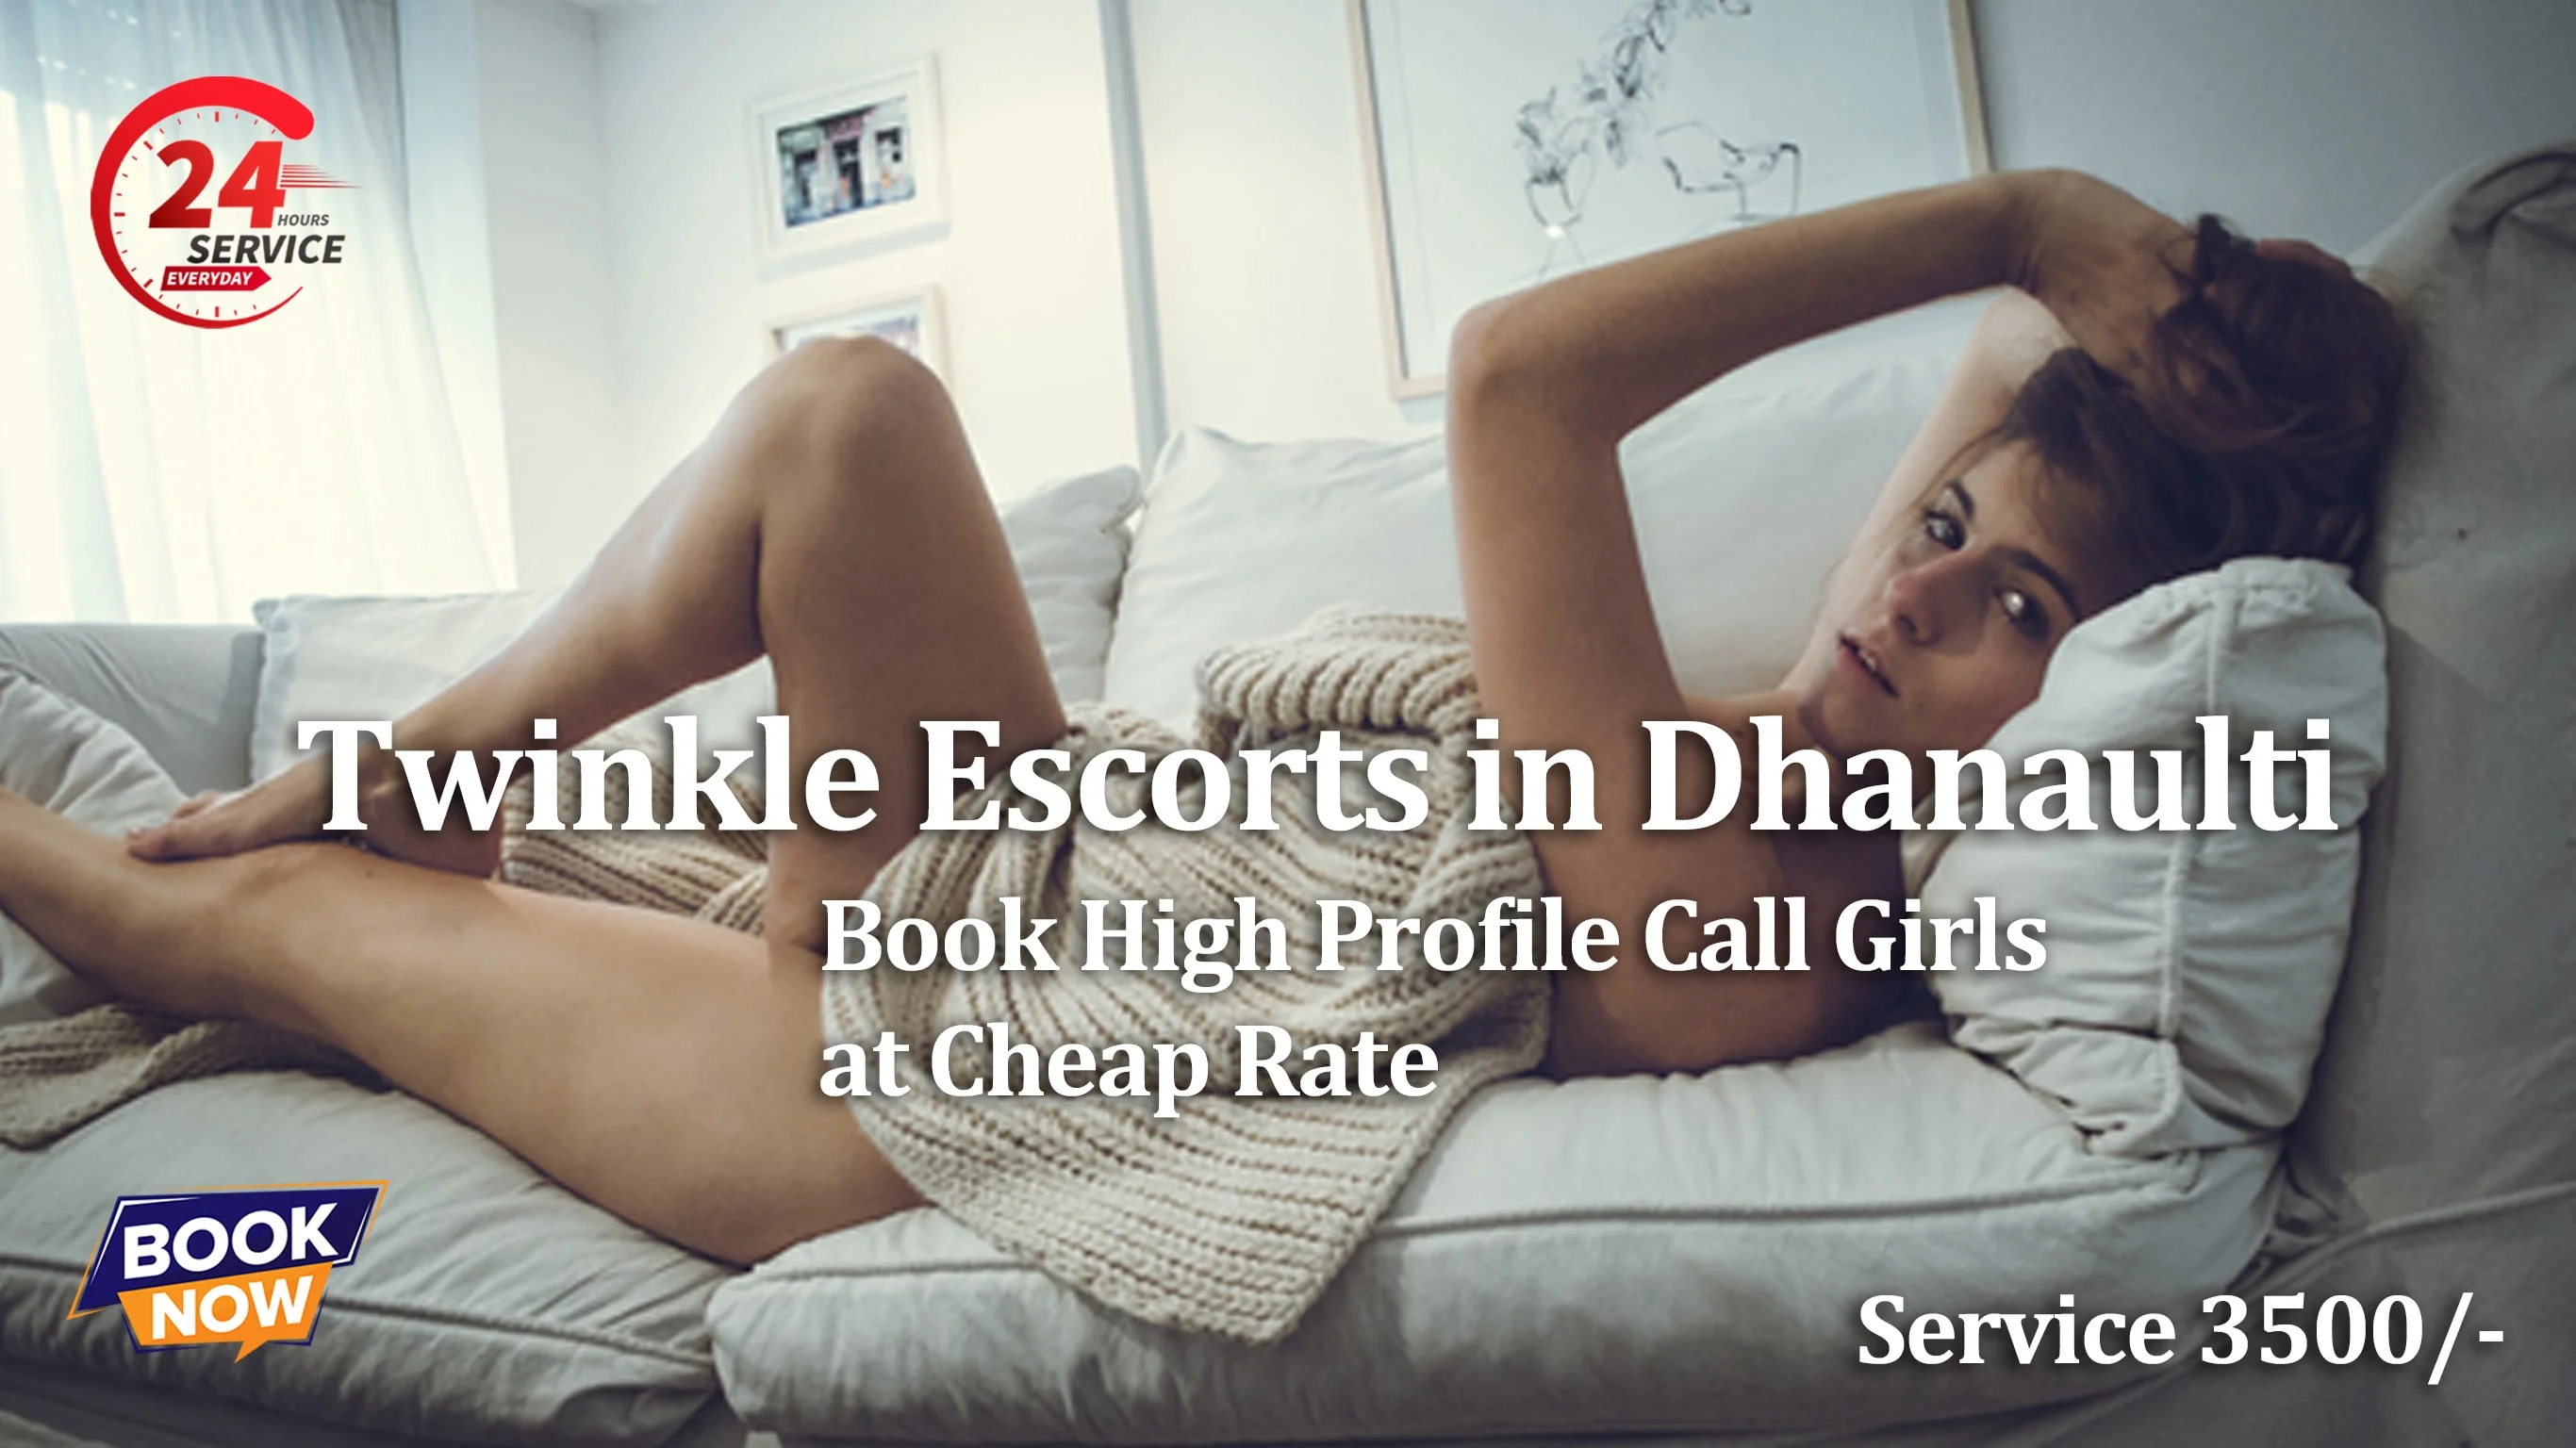 Dhanaulti Escort give description of twinkle escort service charges